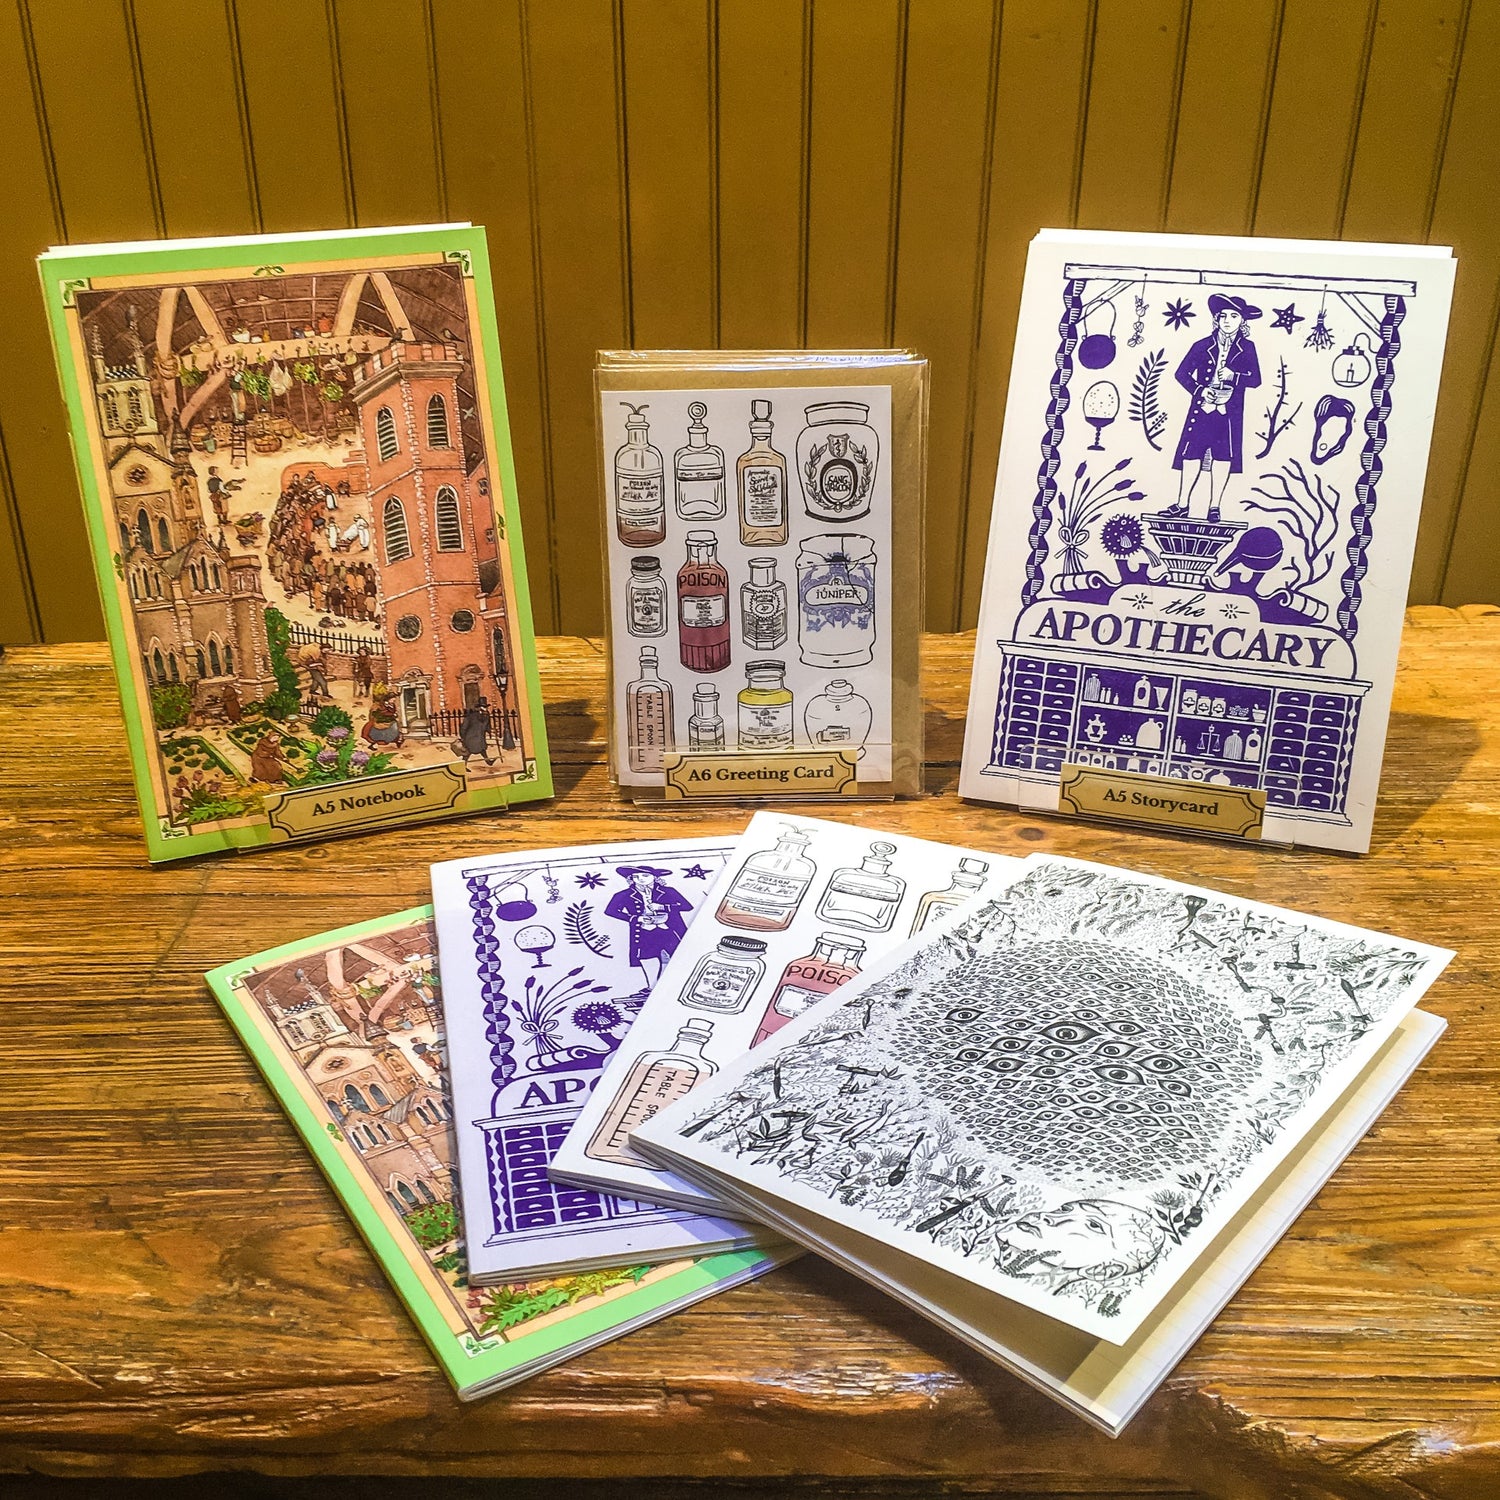 A selection of notebooks in four different designs, displayed on the old operating table